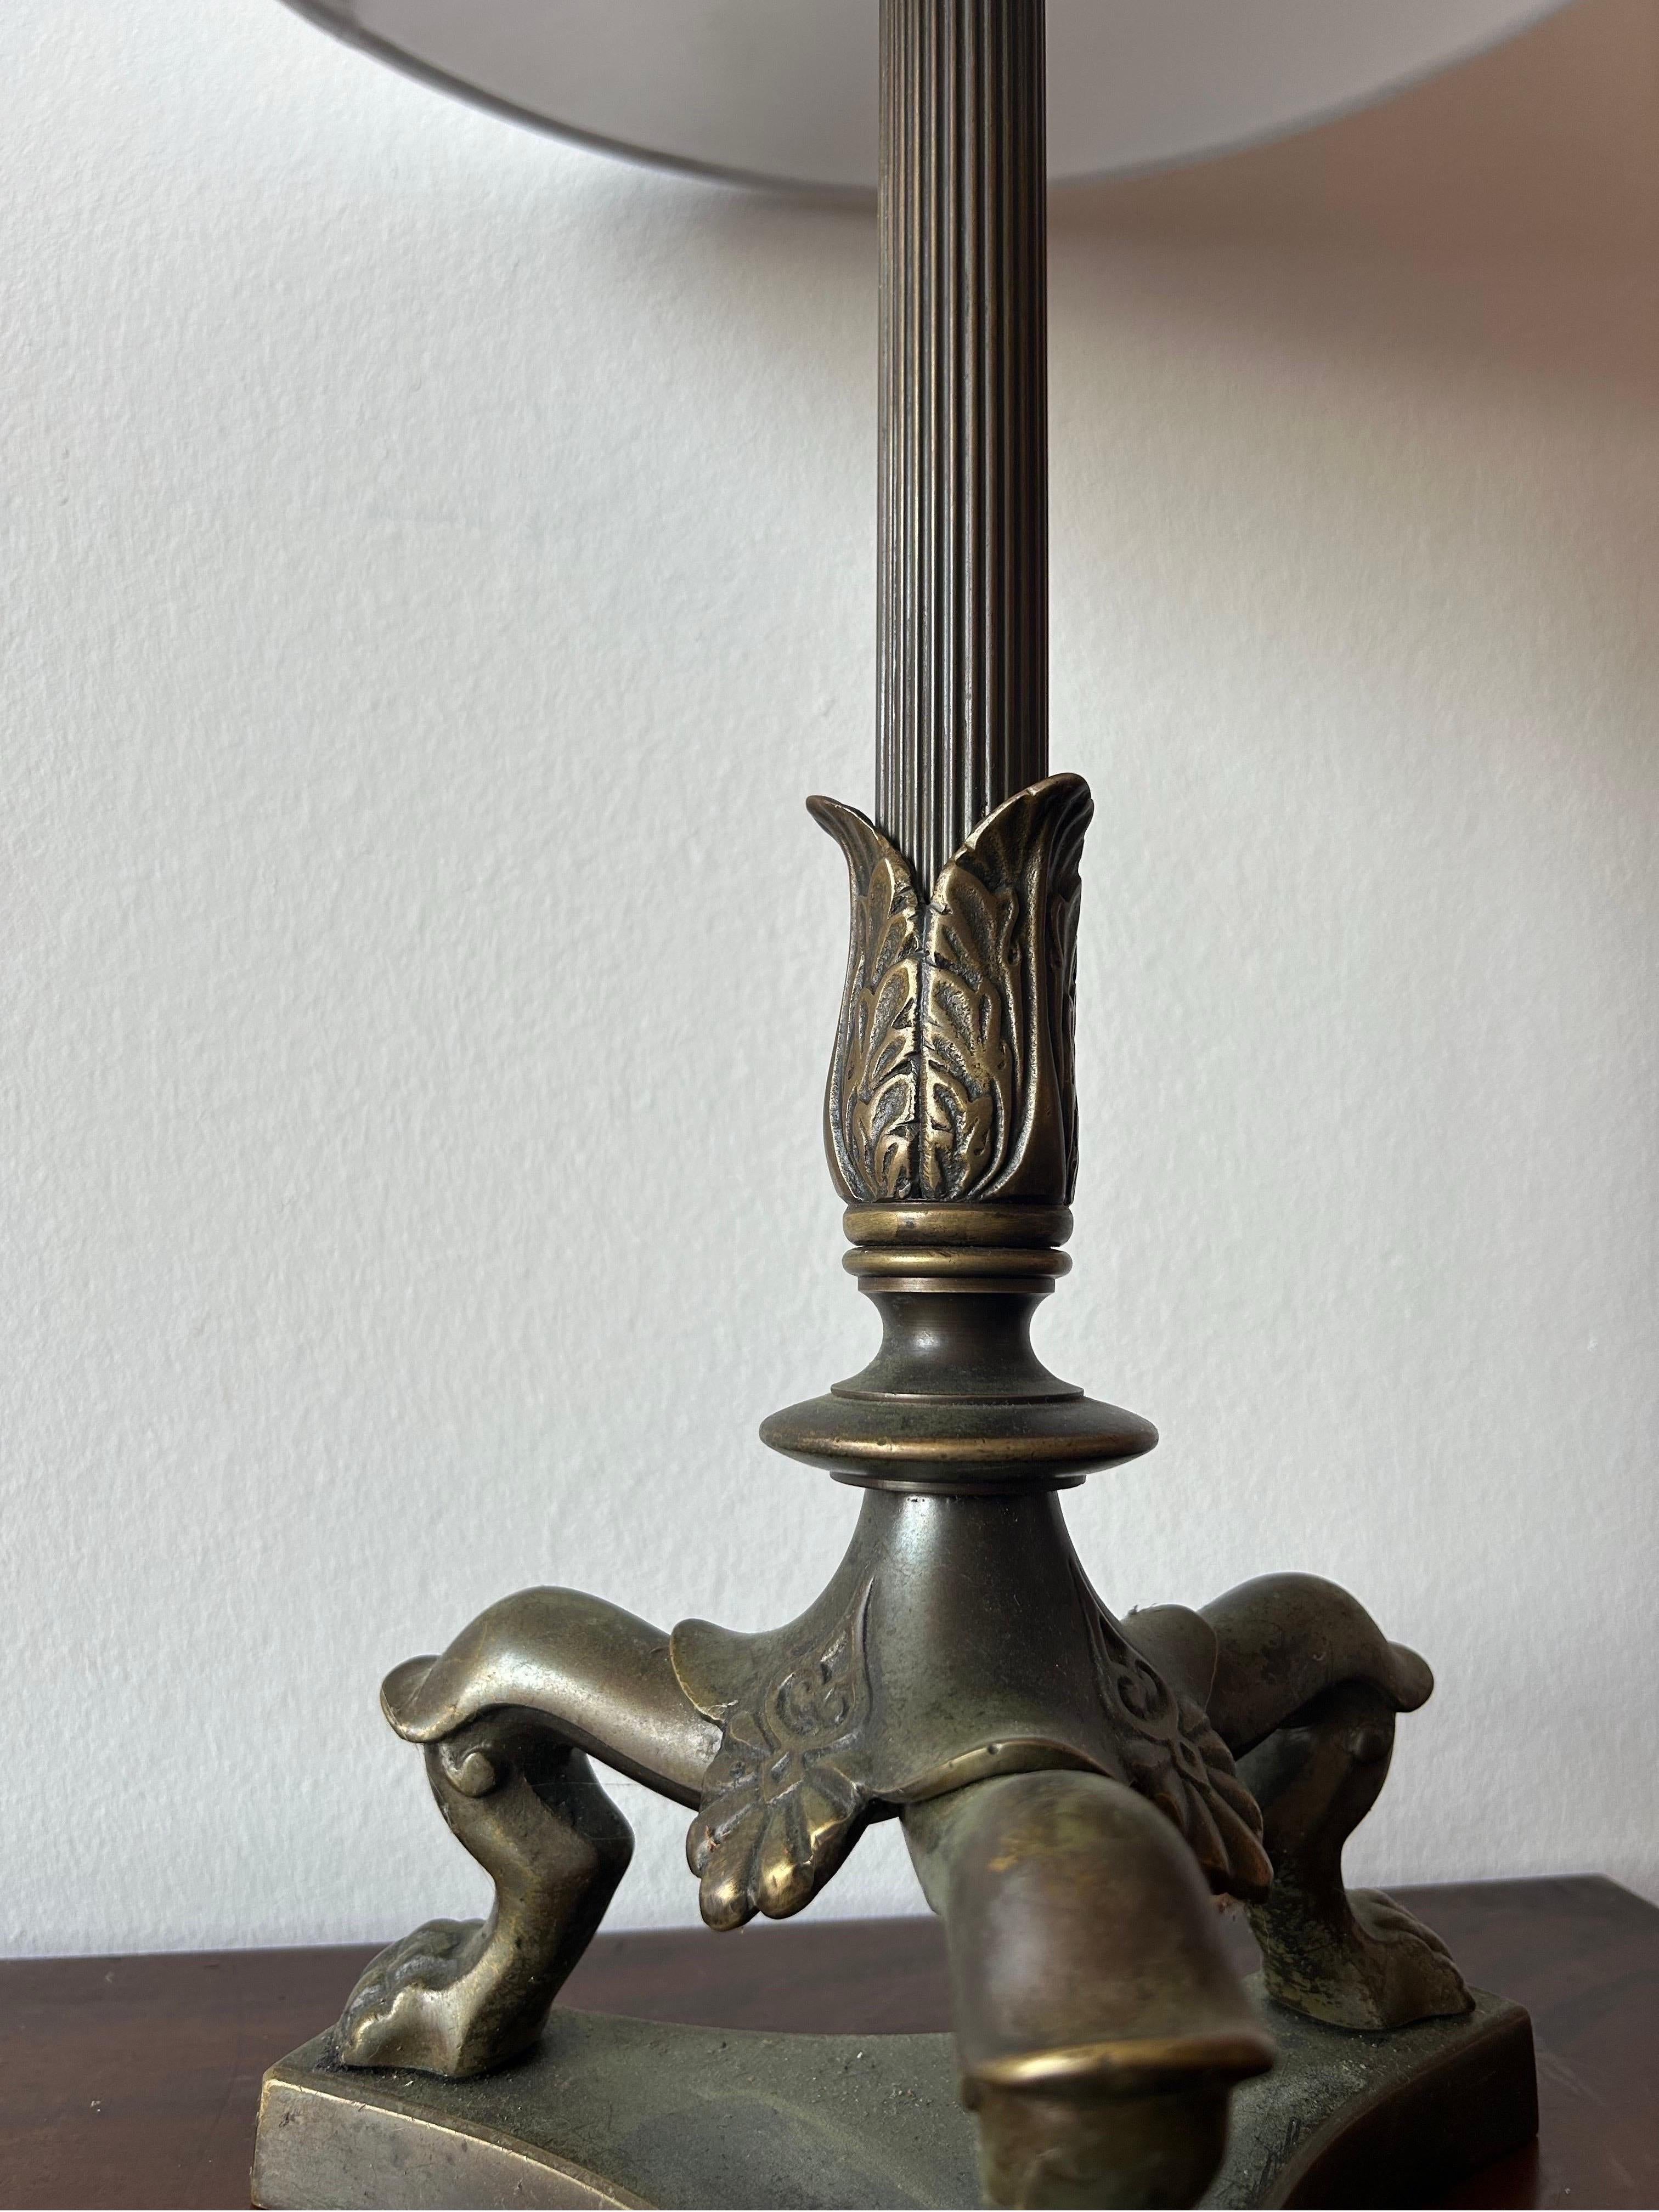 Bronze Table Lamp by Danish Sculptor TH Stein Denmark 1850’s For Sale 2